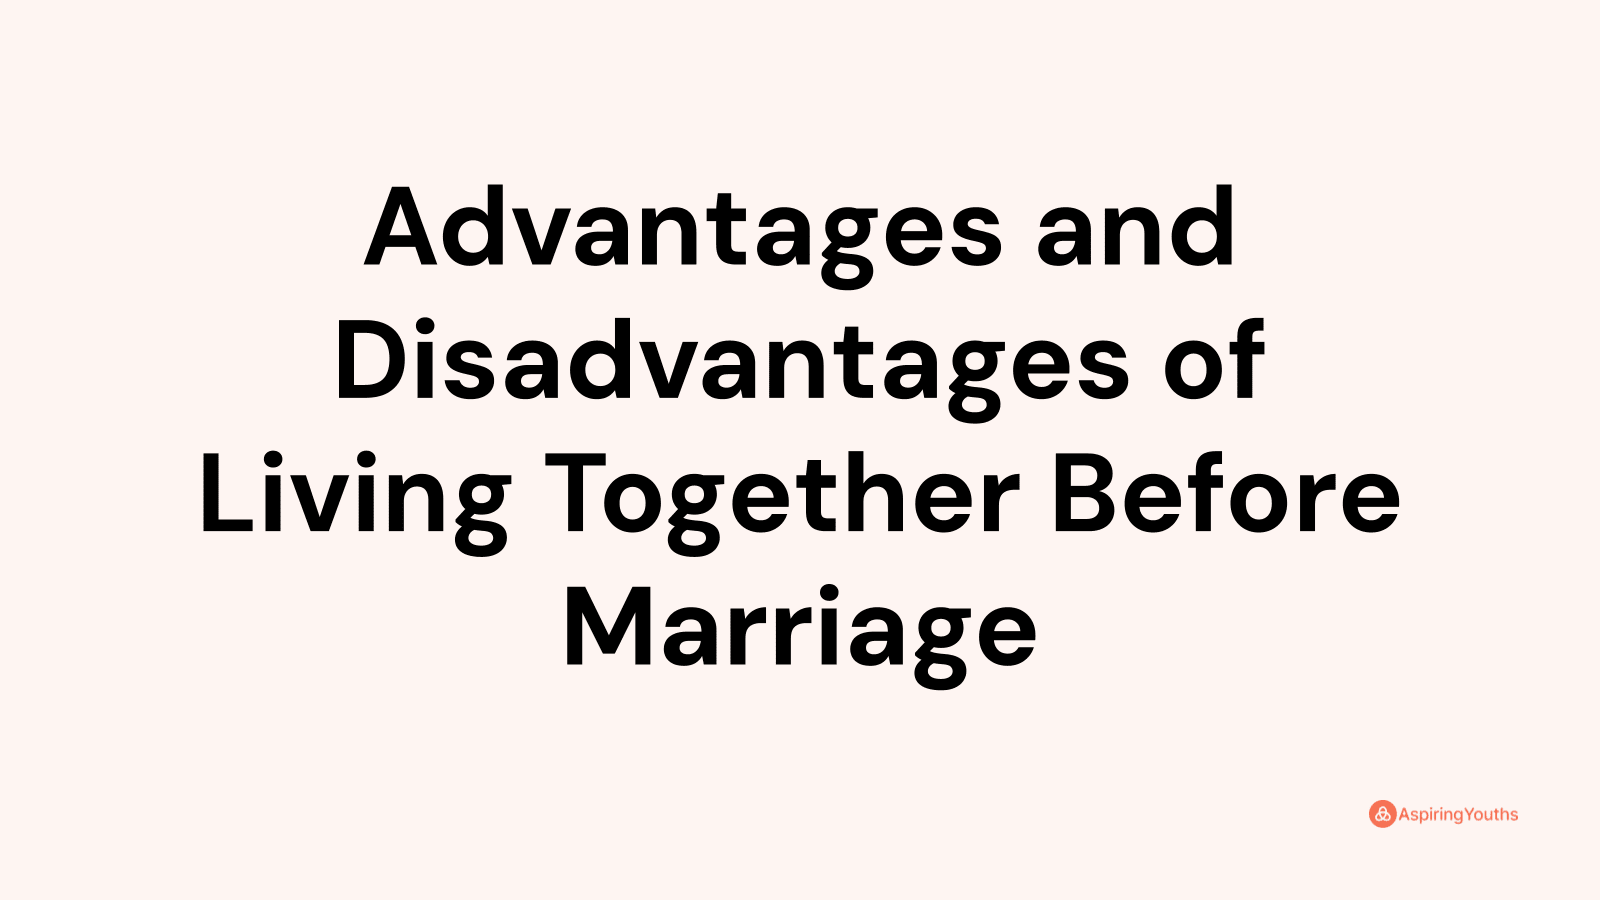 Advantages and disadvantages of Living Together Before Marriage